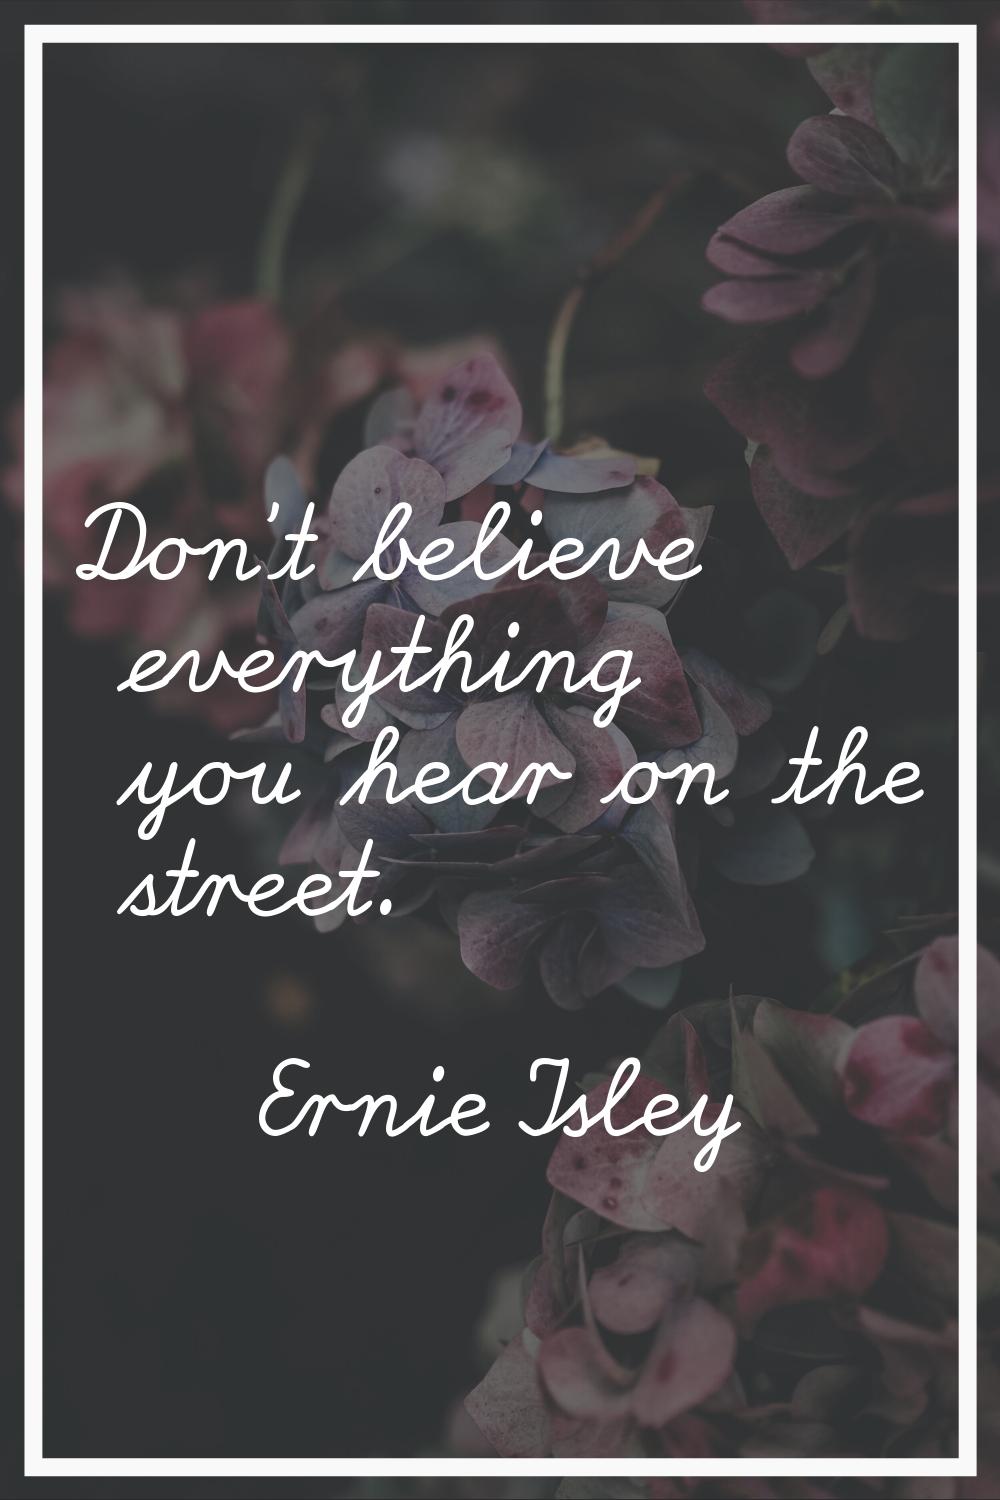 Don't believe everything you hear on the street.